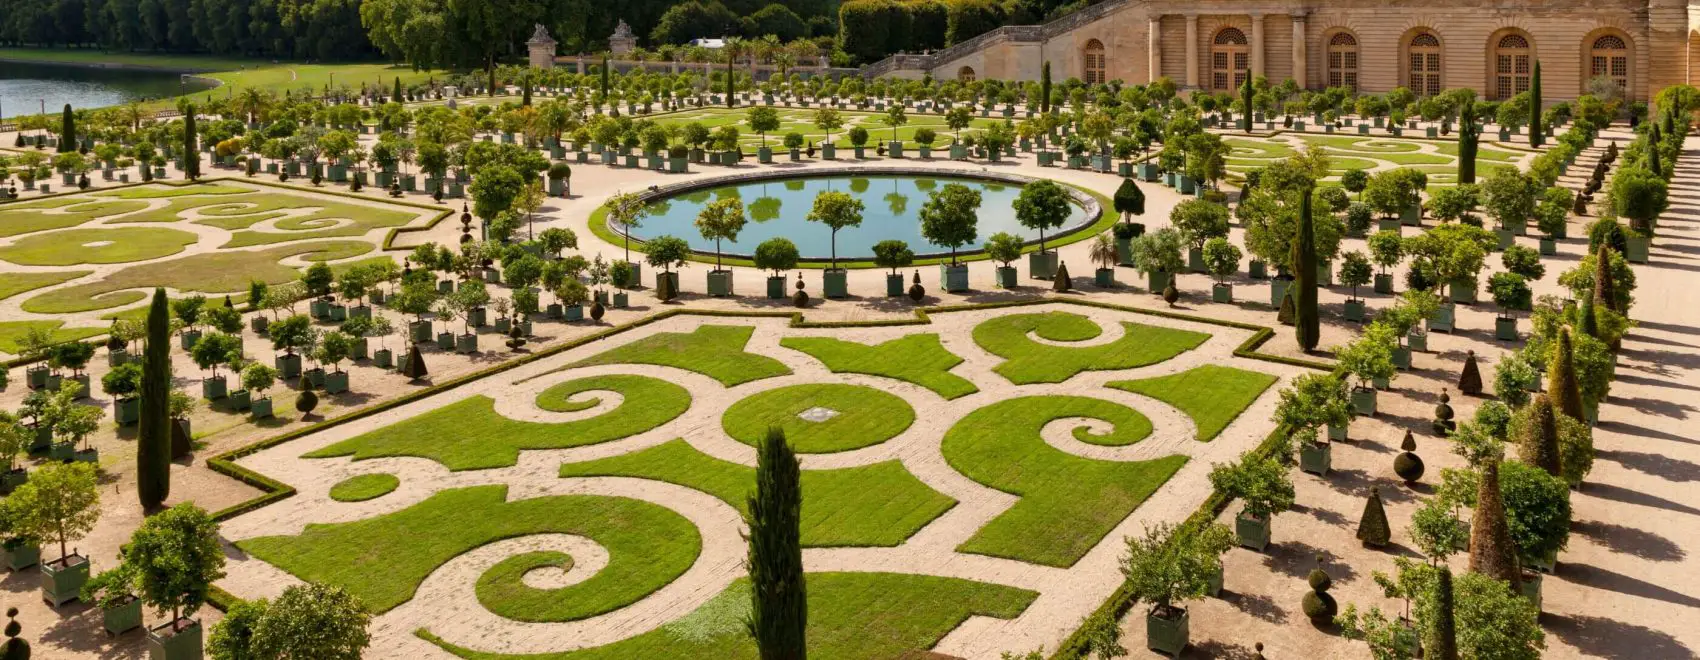 The gardens on a romantic day trip from Paris to Versailles